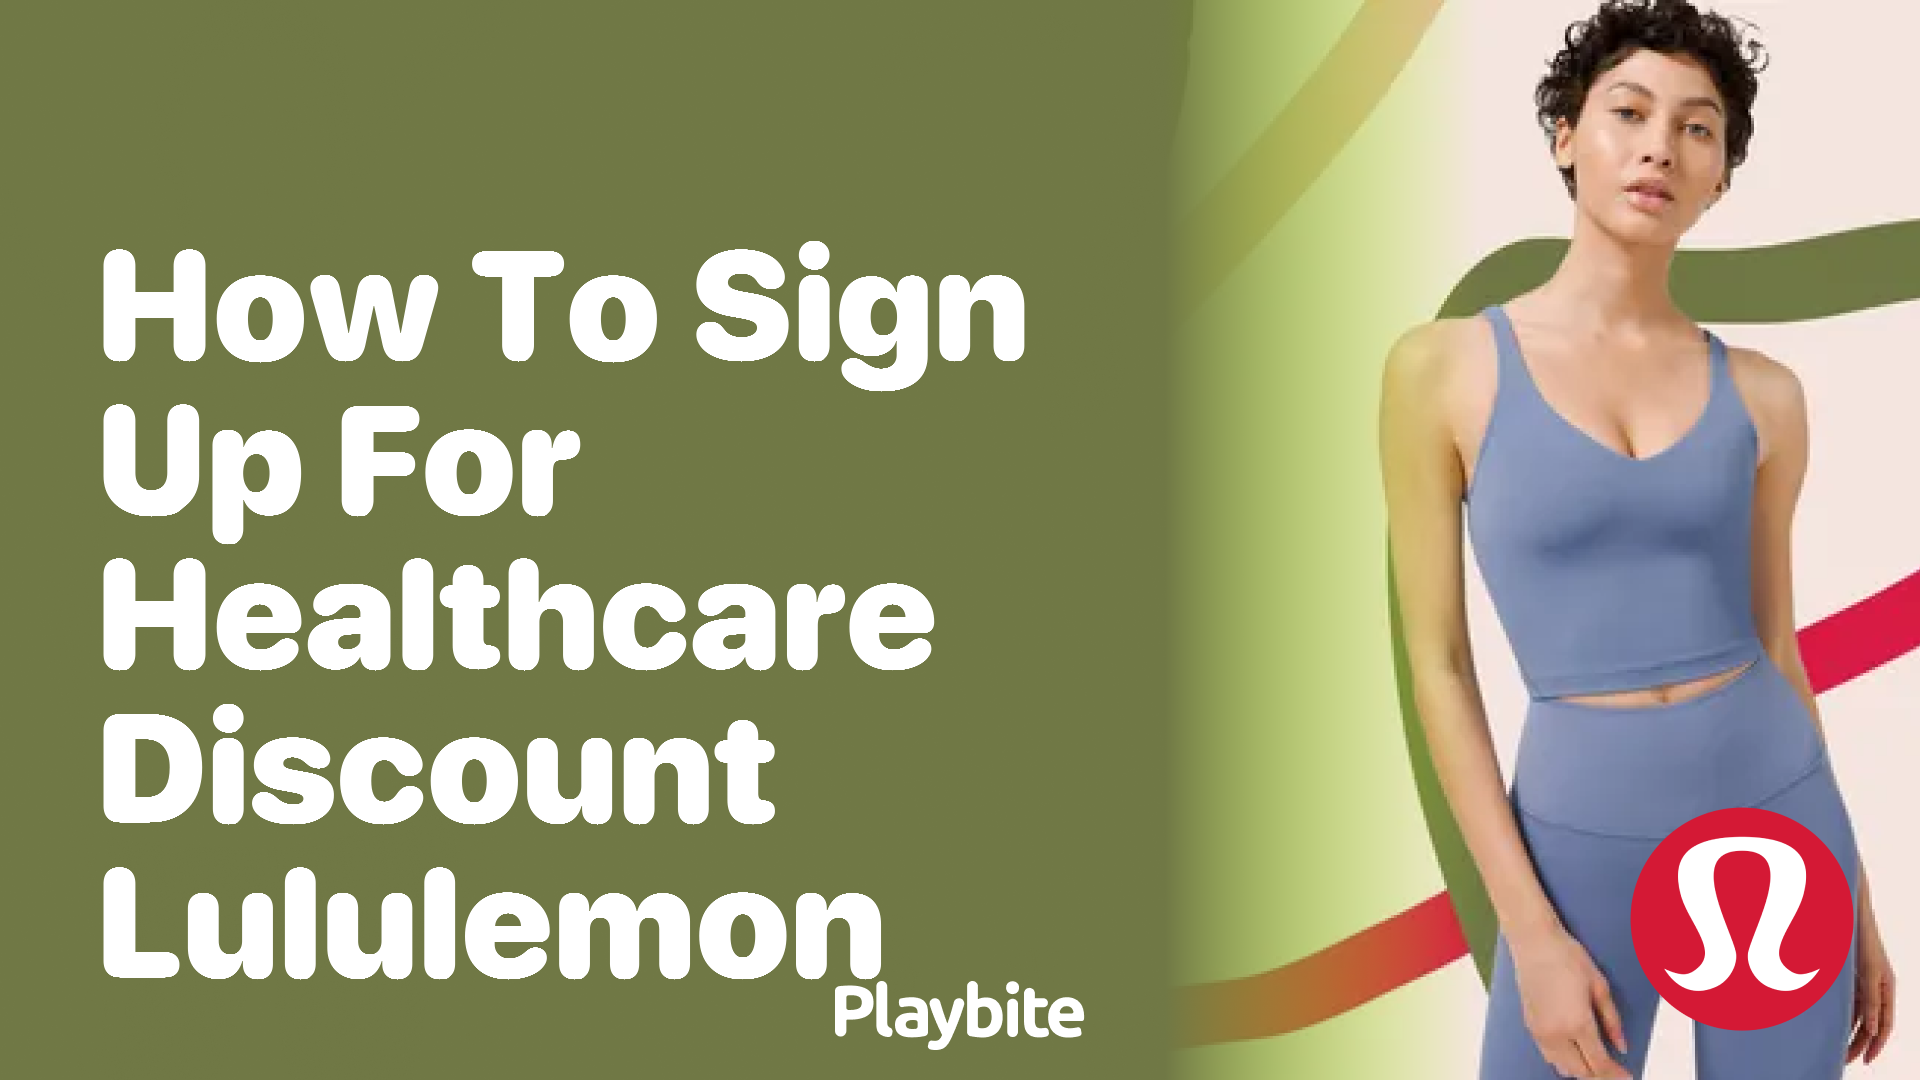 How to Sign Up for the Healthcare Discount at Lululemon